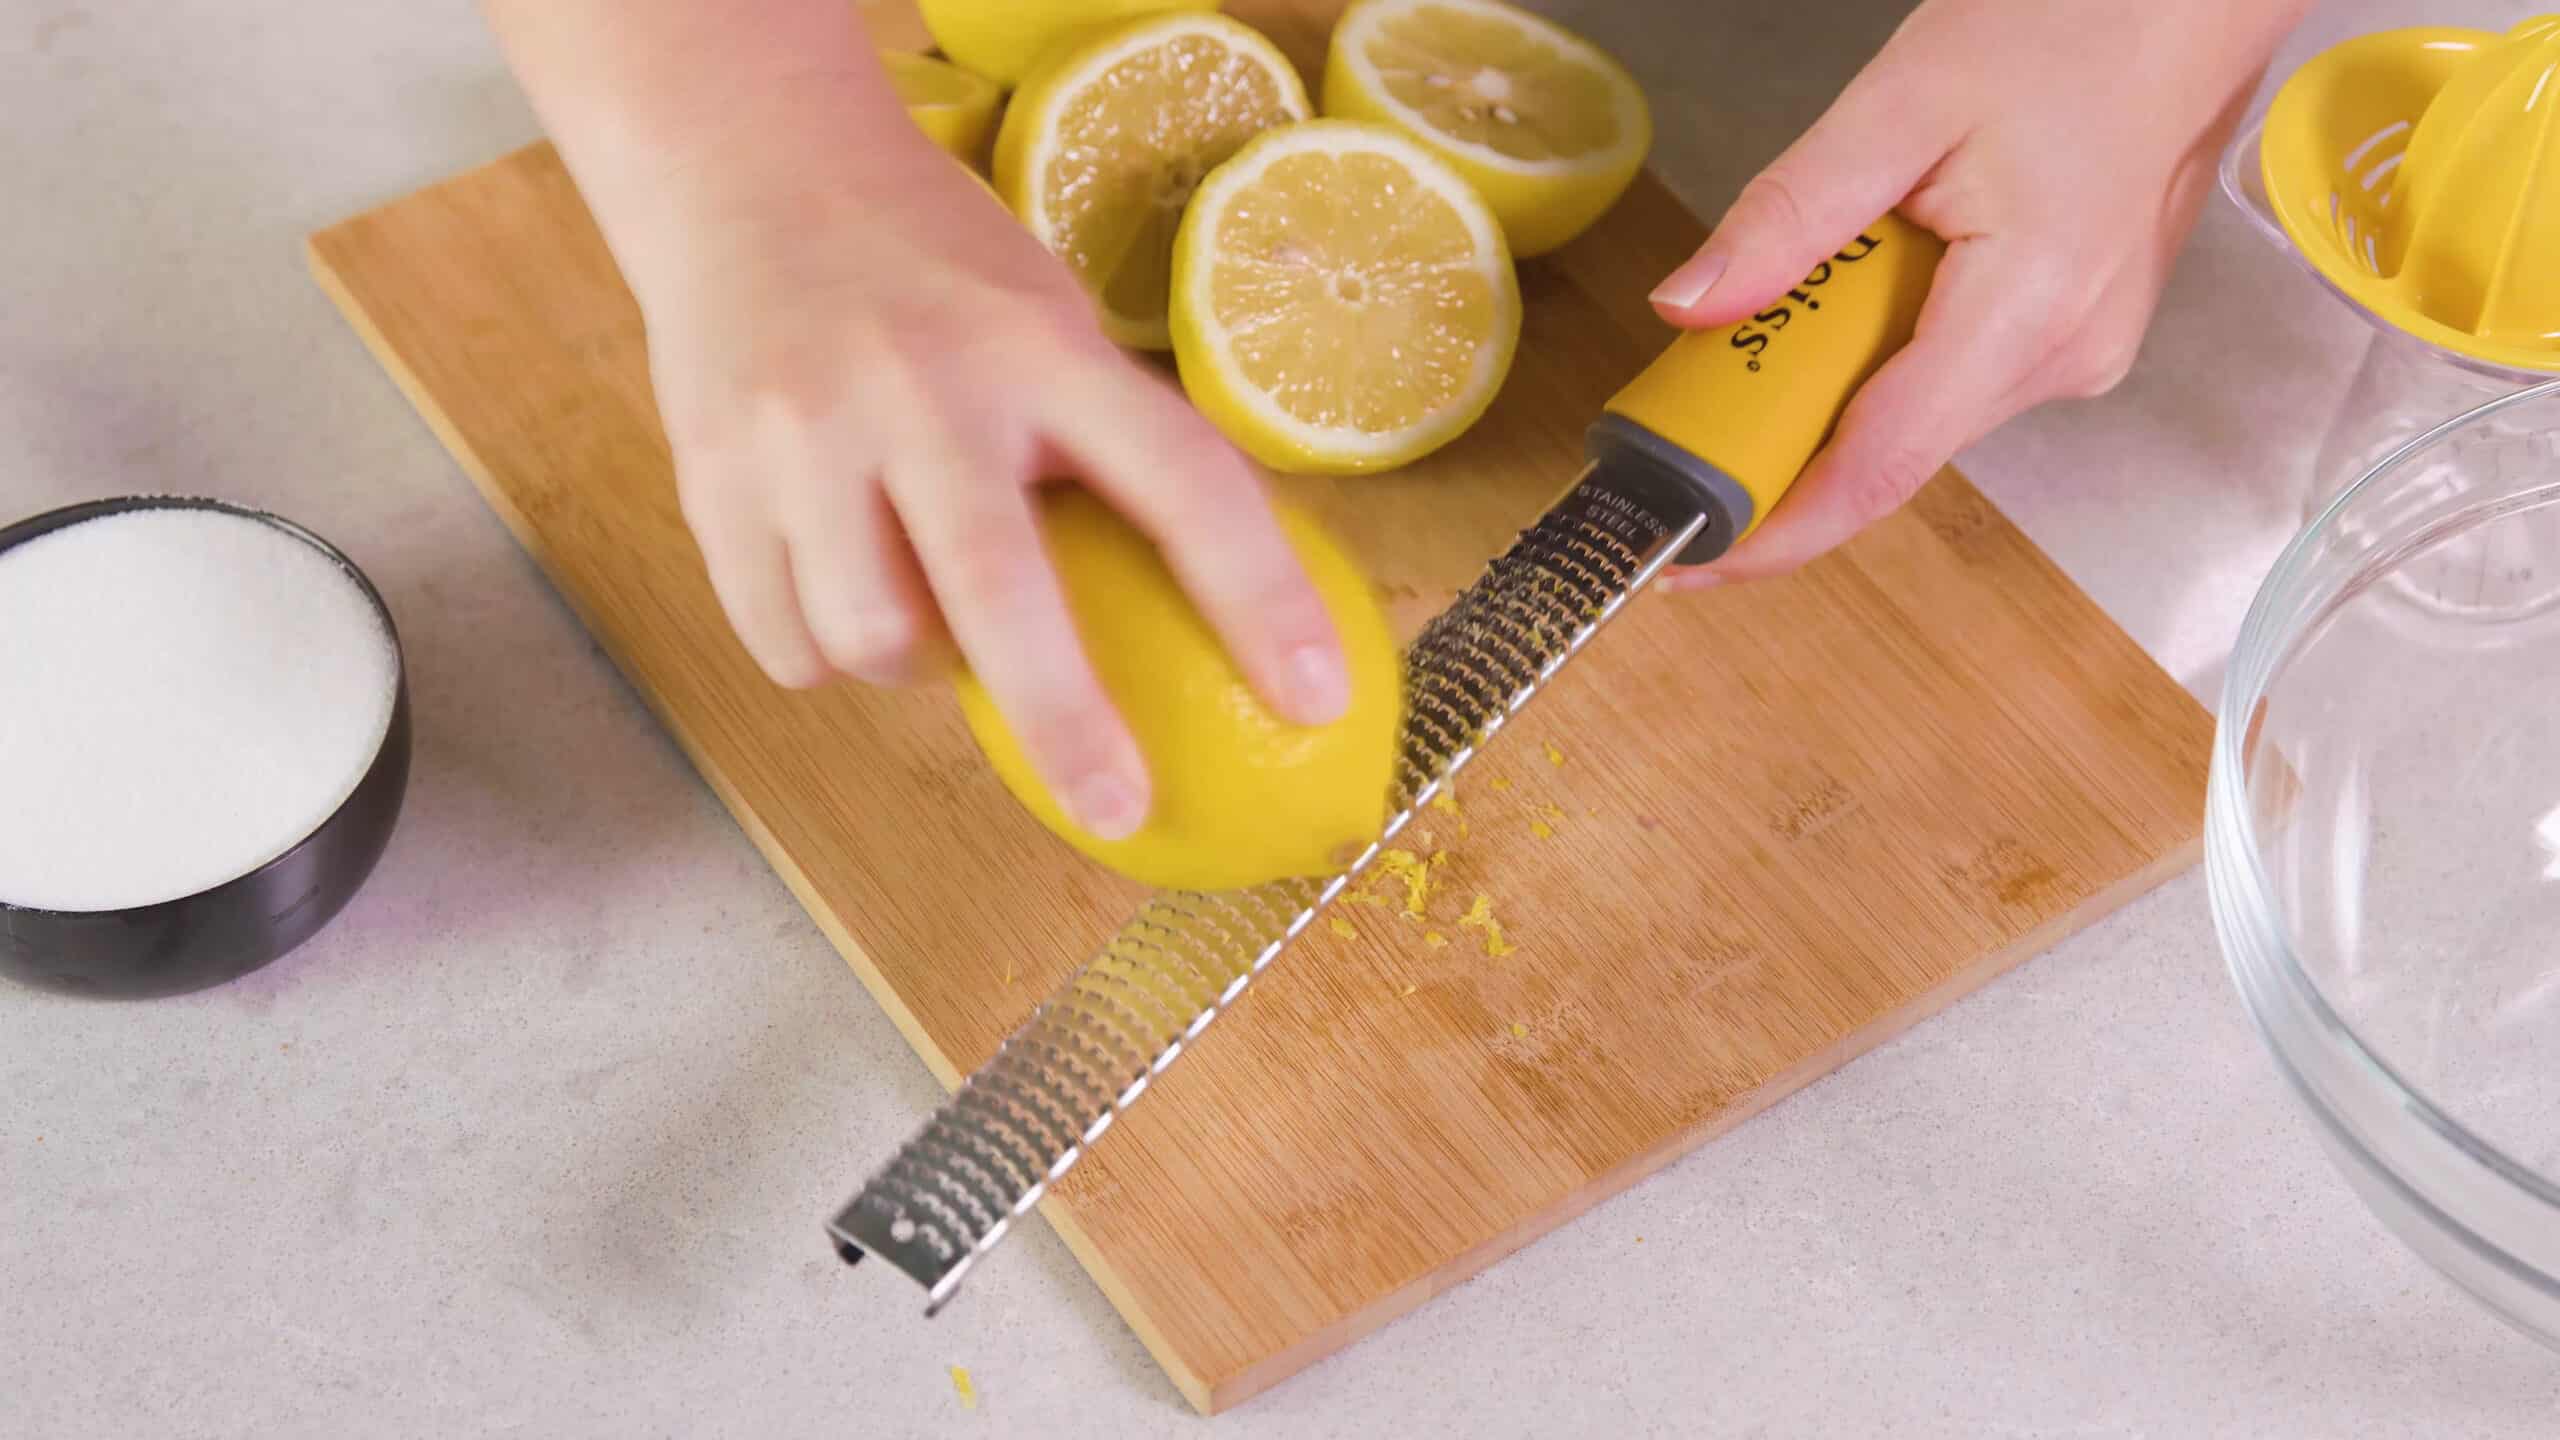 Overhead view of one lemon being zested with a stainless steel fruit zester on a cutting board with three halved lemons ready to juice.